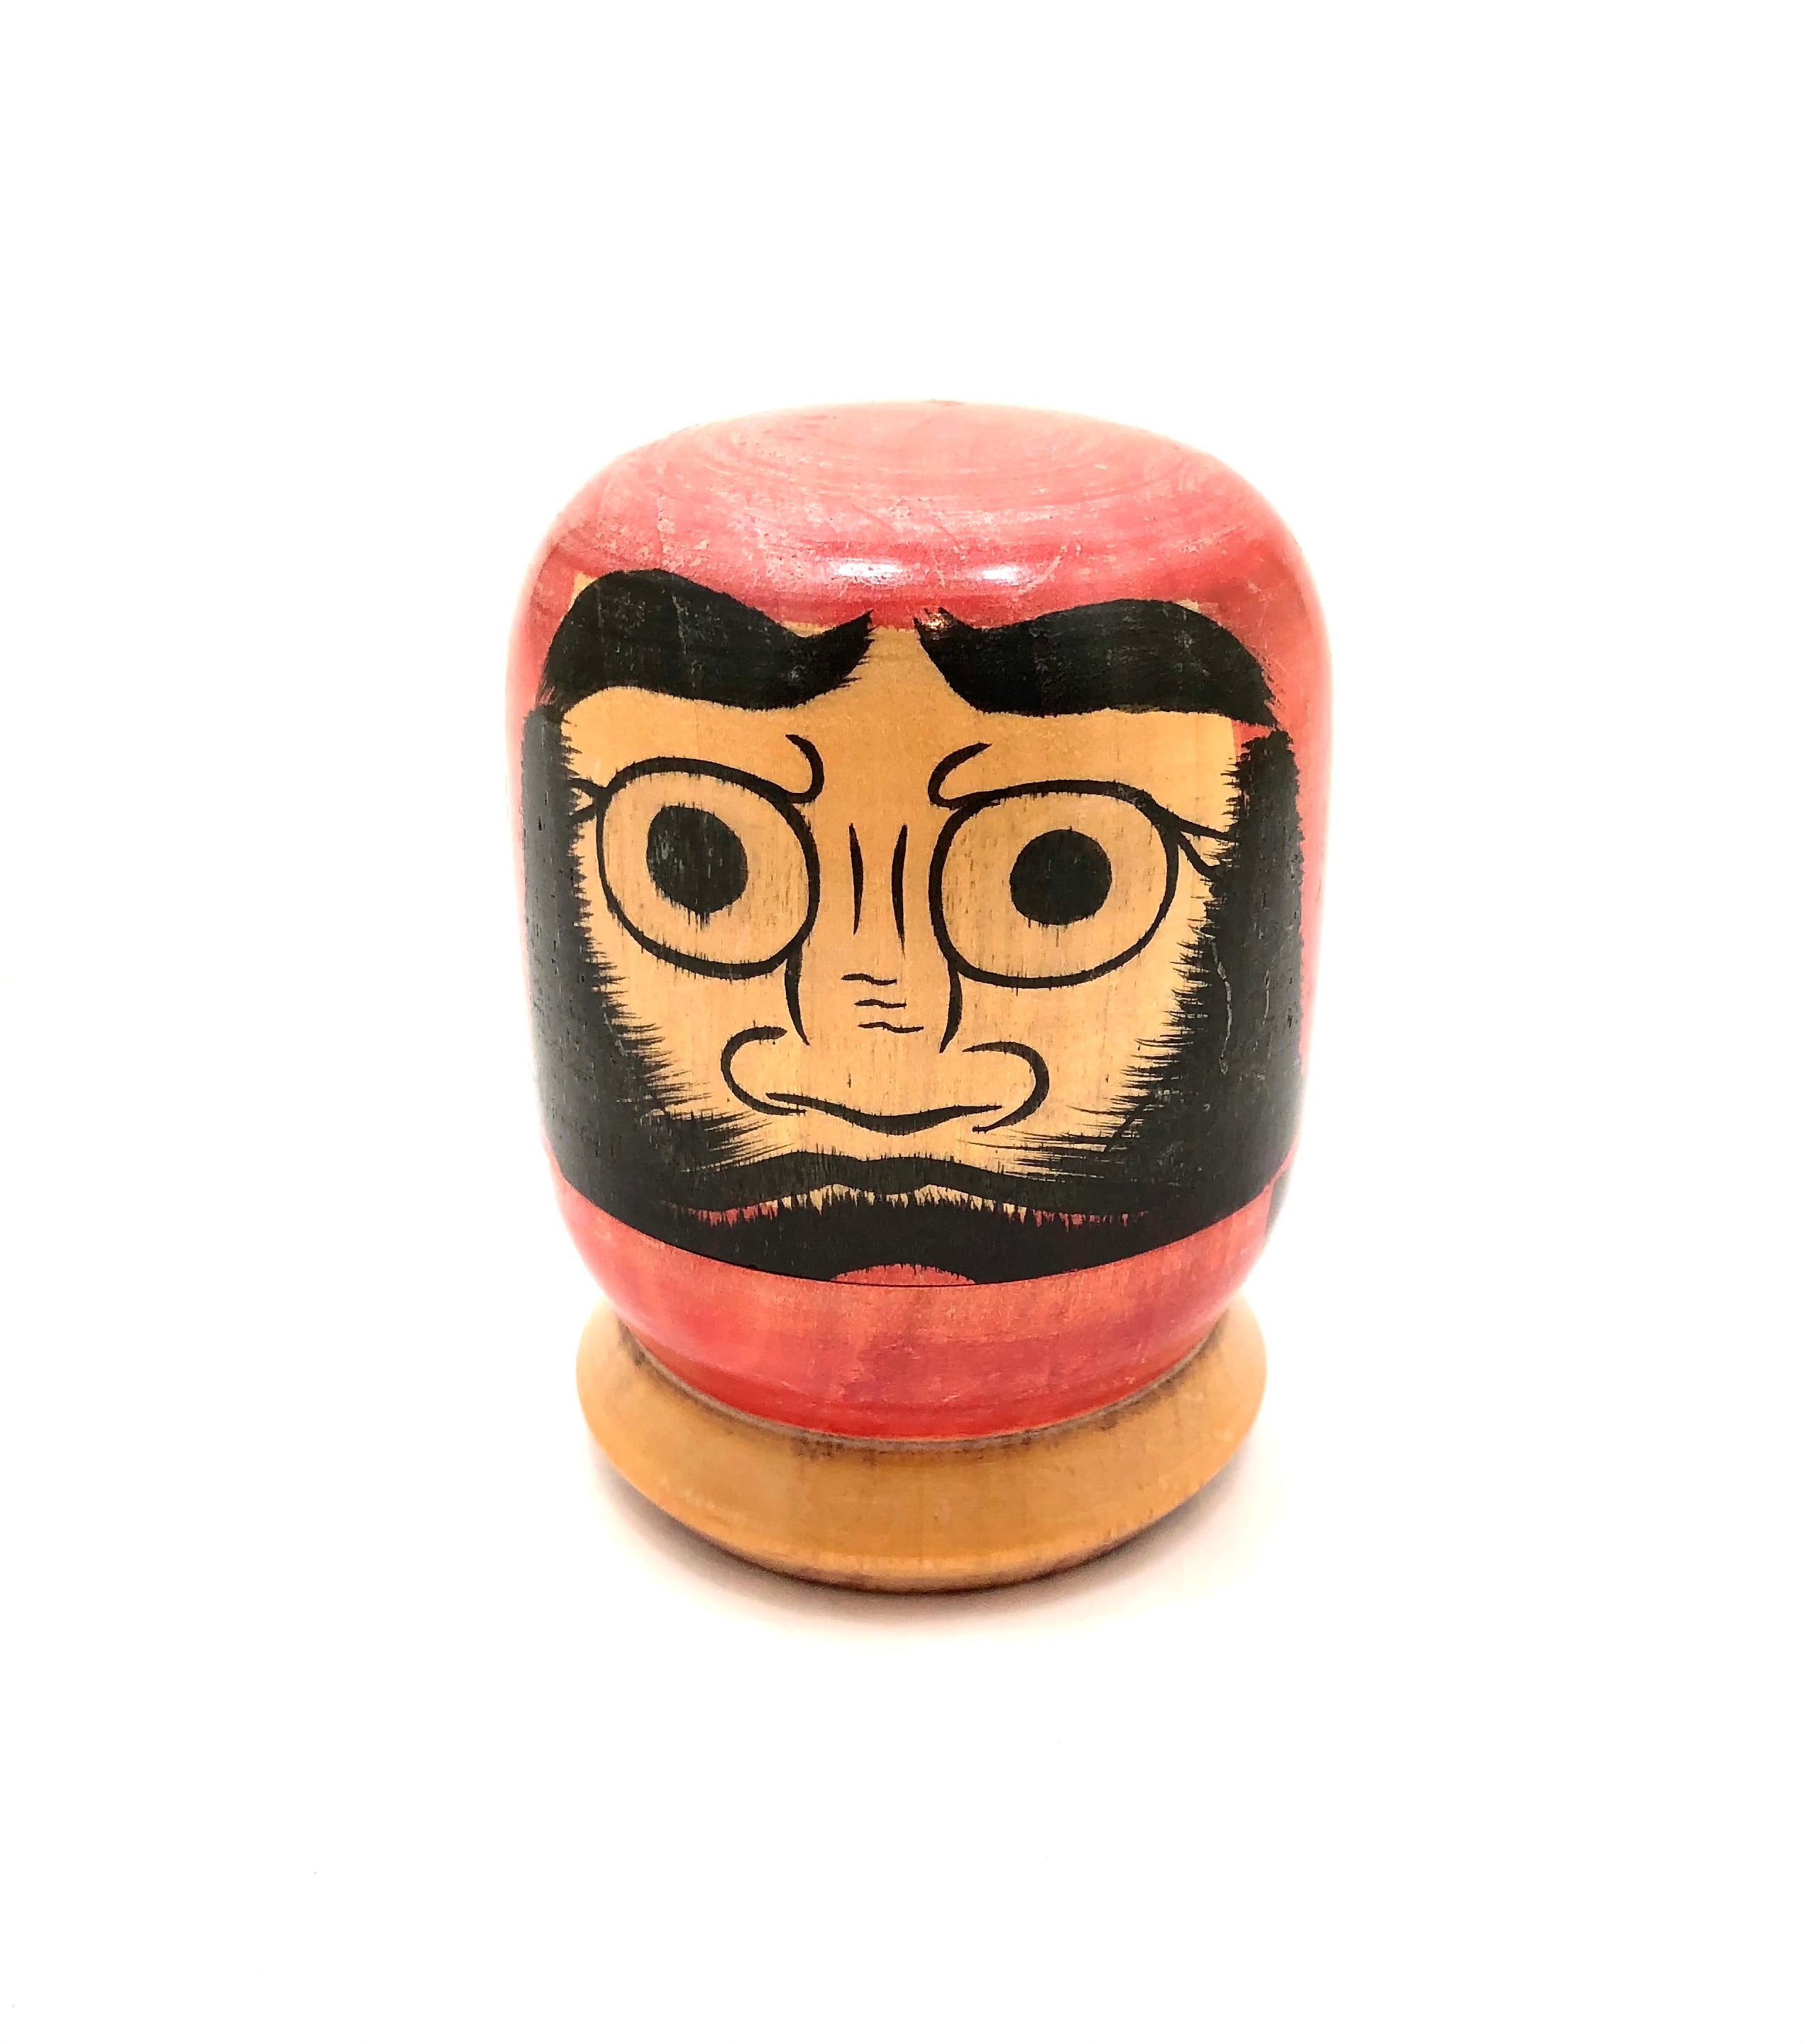 Vintage Japanese Miniature Traditional Kokeshi Toys | “Mame-omocha” from a  Childs Toy Box